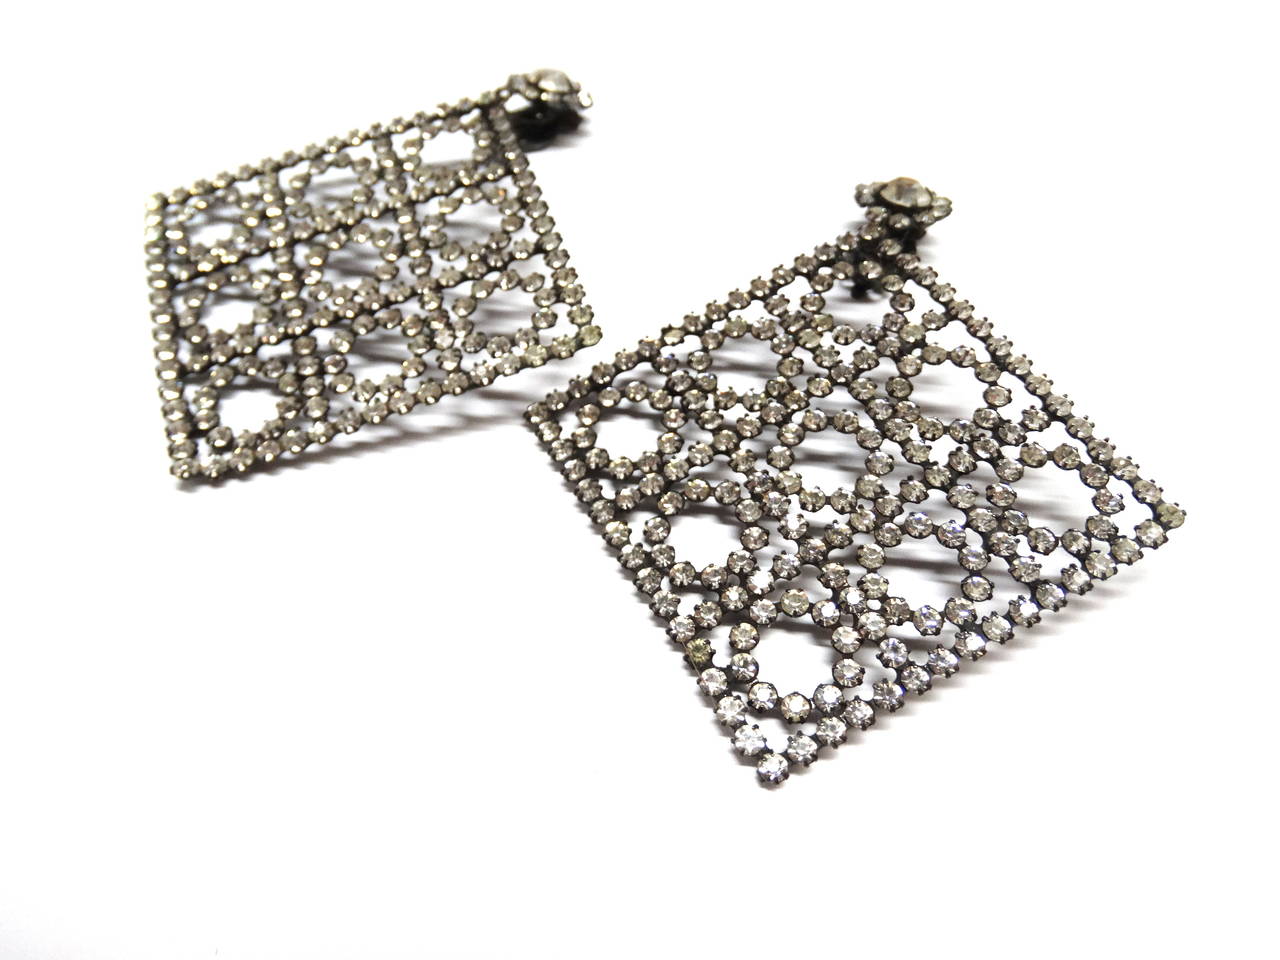 A rare pair of Kenneth Jay Lane crystal earrings! In a gun-metal “cuboct lattice